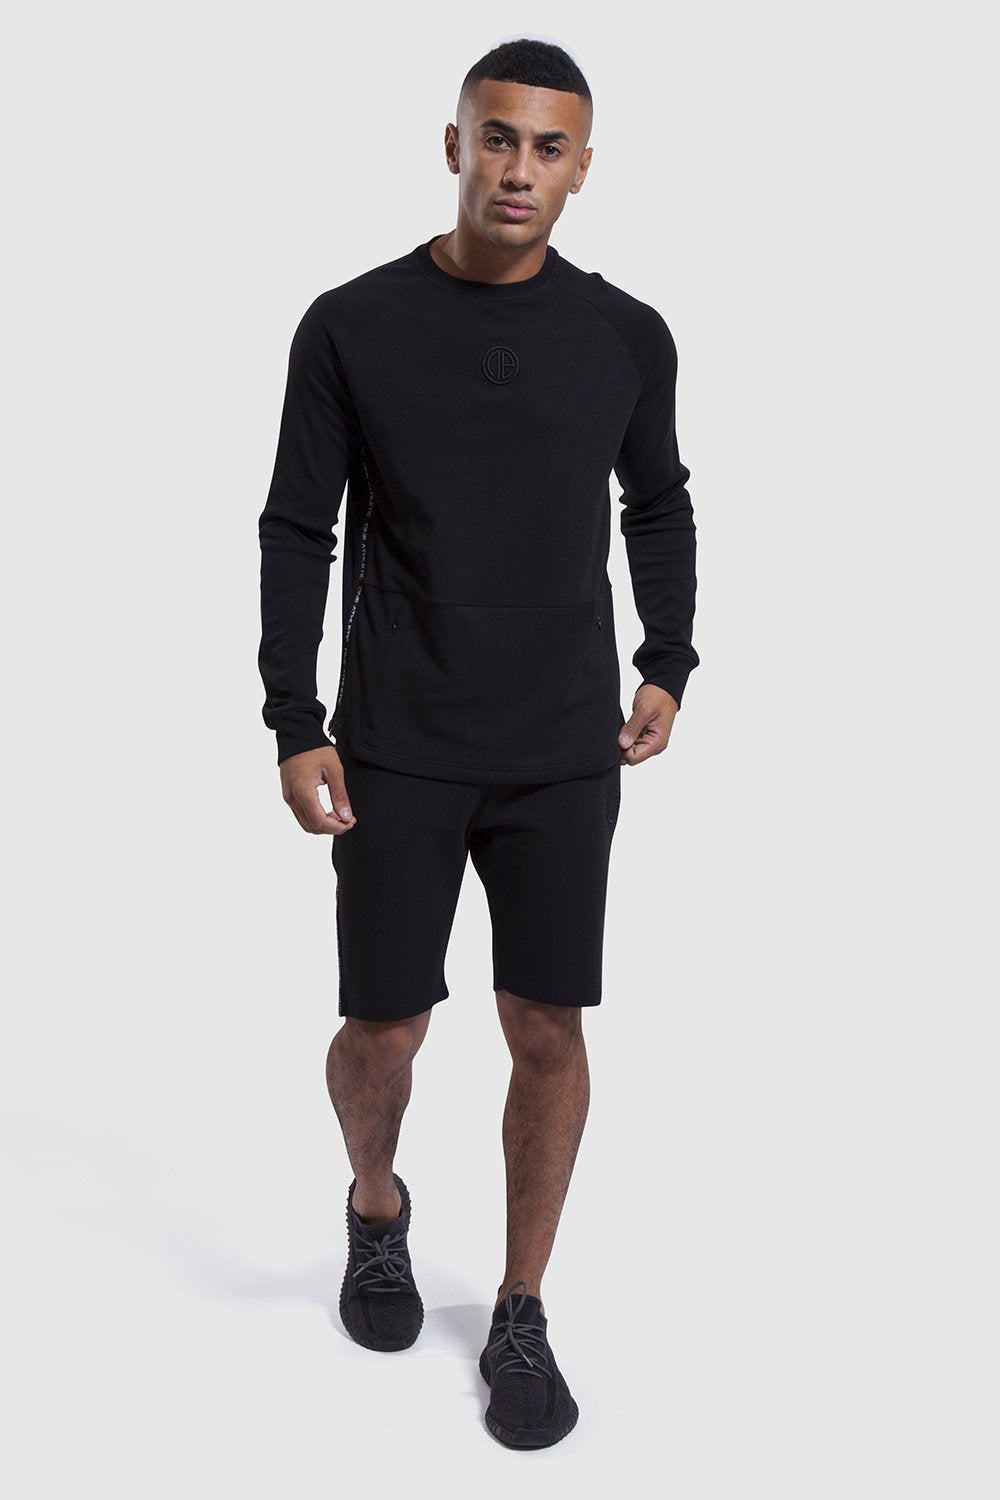 Black Iverson II shorts and long sleeve top